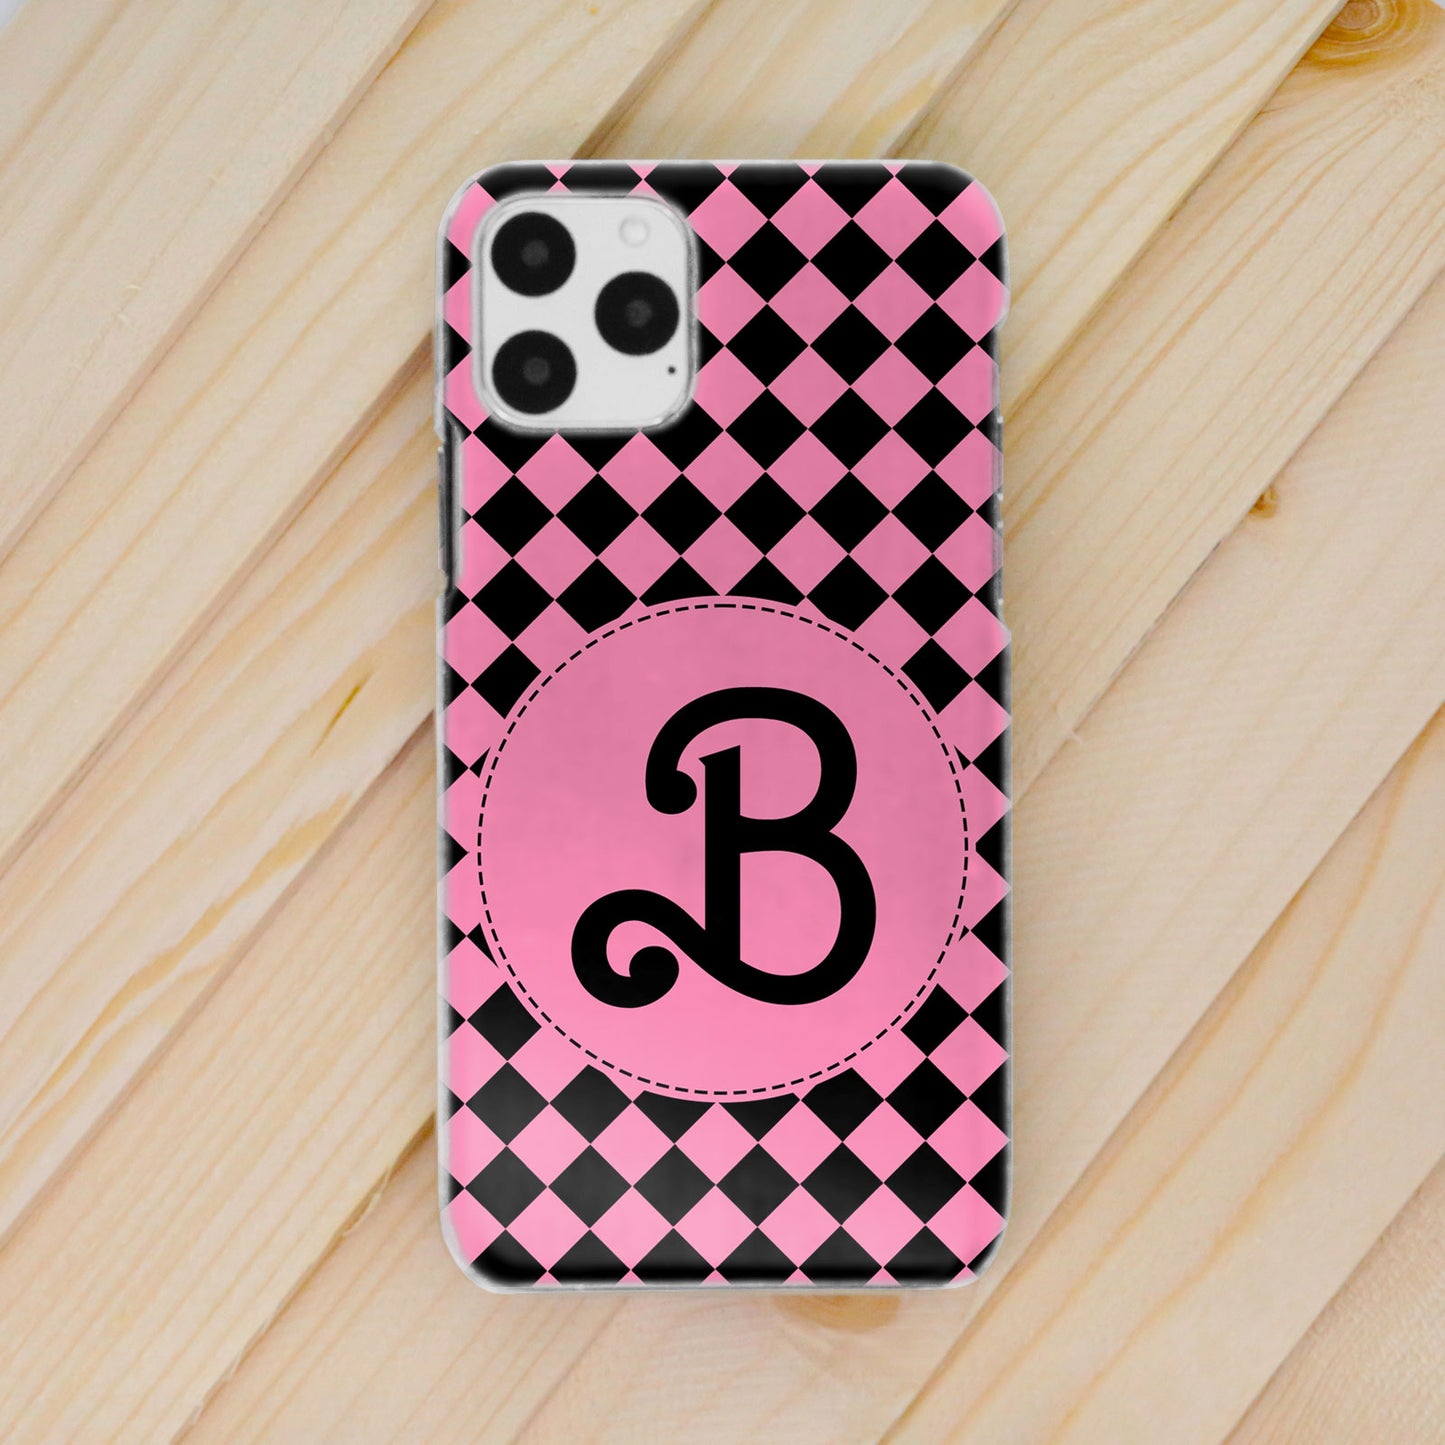 Personalised Barbie Inspired iPhone Case - Black and Pink Check Monogram